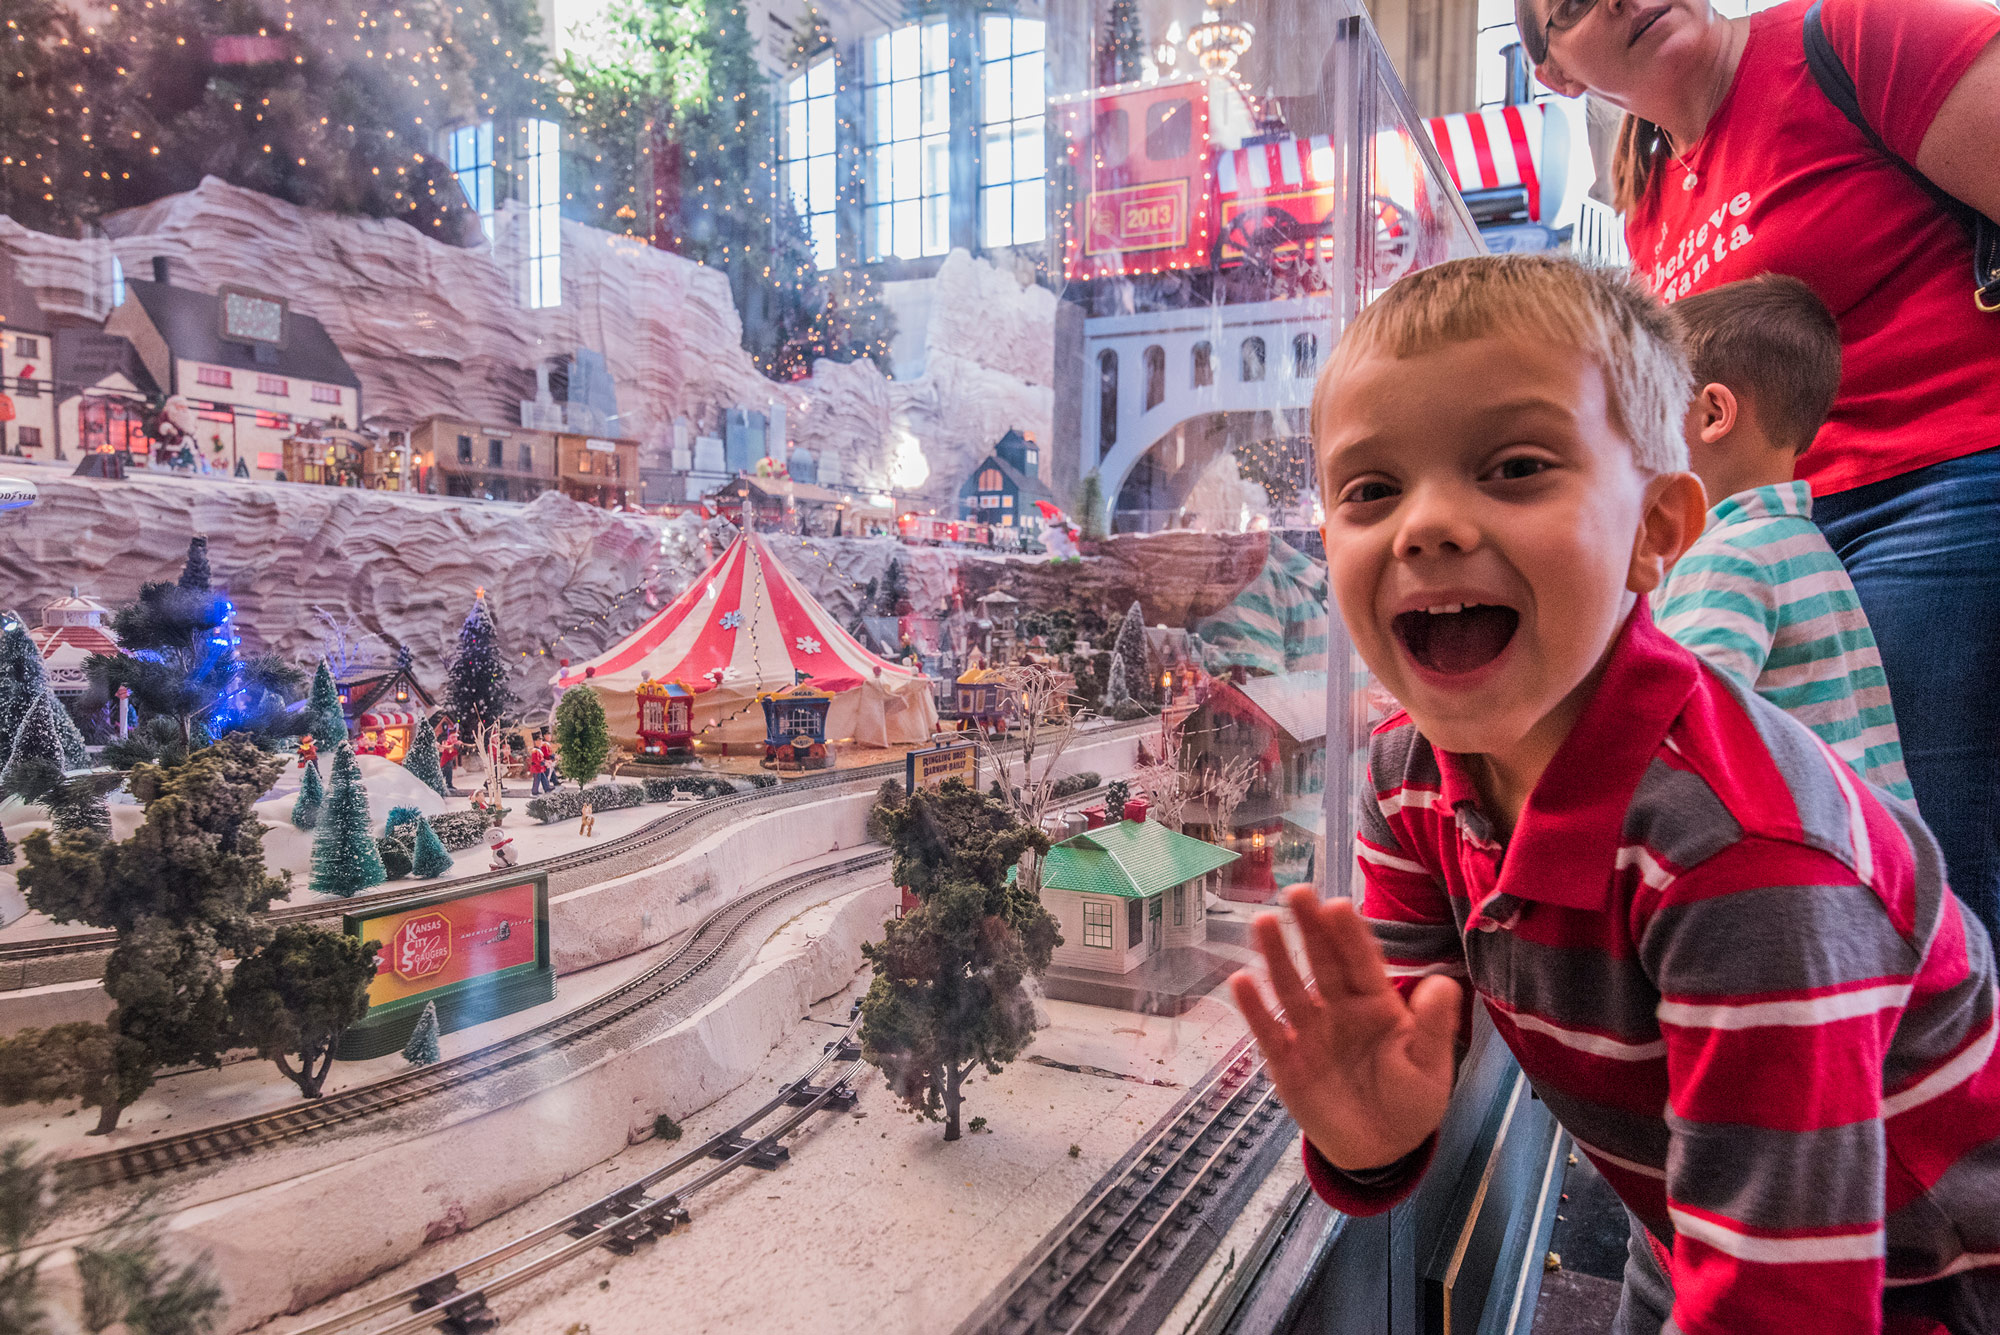 Photo of boy waving in front of model train display